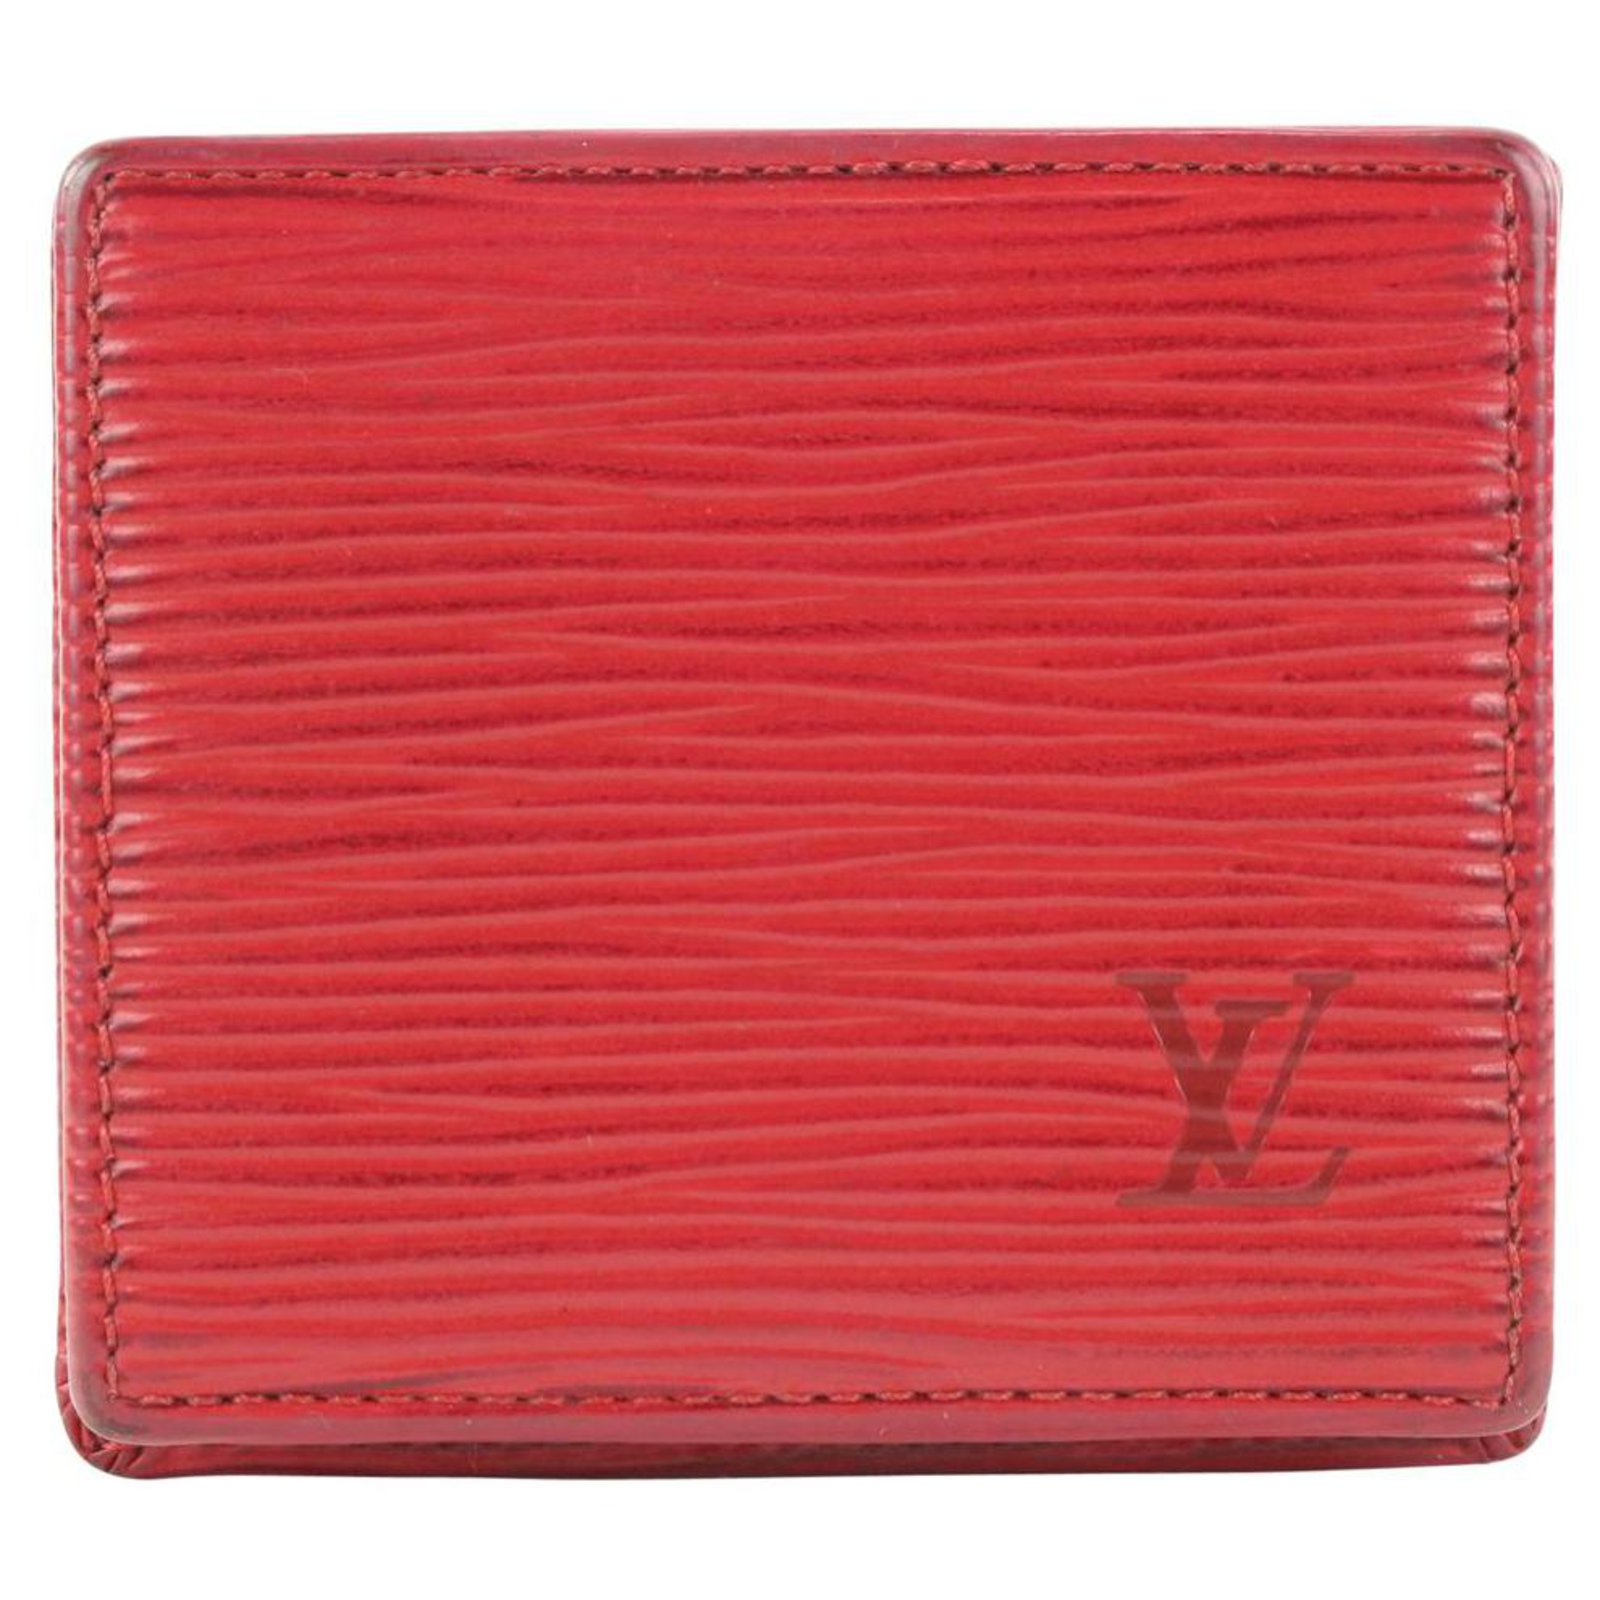 Louis Vuitton Red Epi Leather Collapsible Boite Coin Box 402lvs527 –  Bagriculture